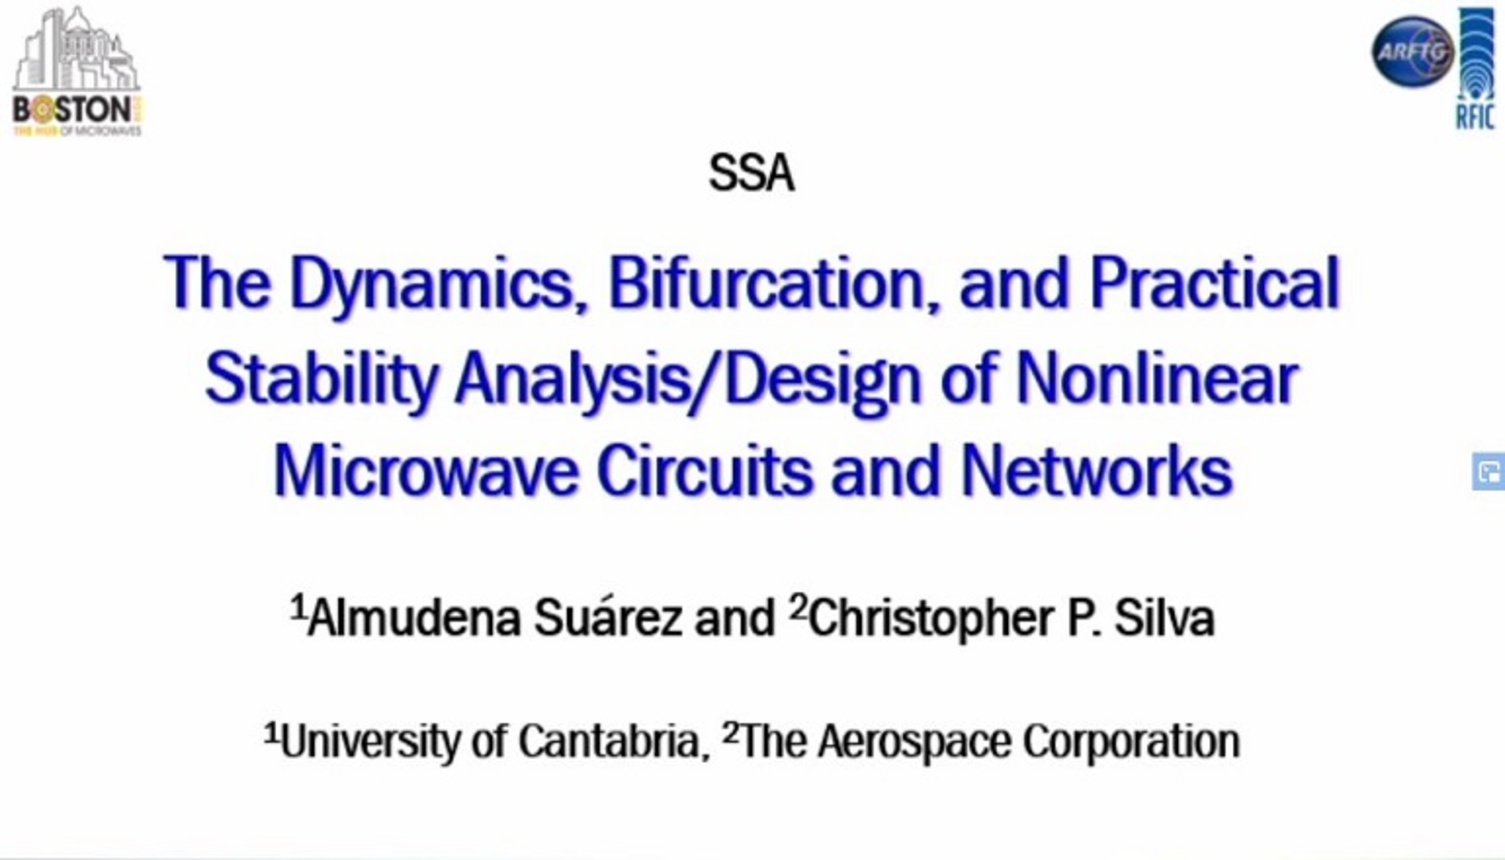 The Dynamics, Bifurcation, and Practical Stability Analysis/Design of Nonlinear Microwave Circuits and Networks Part 4